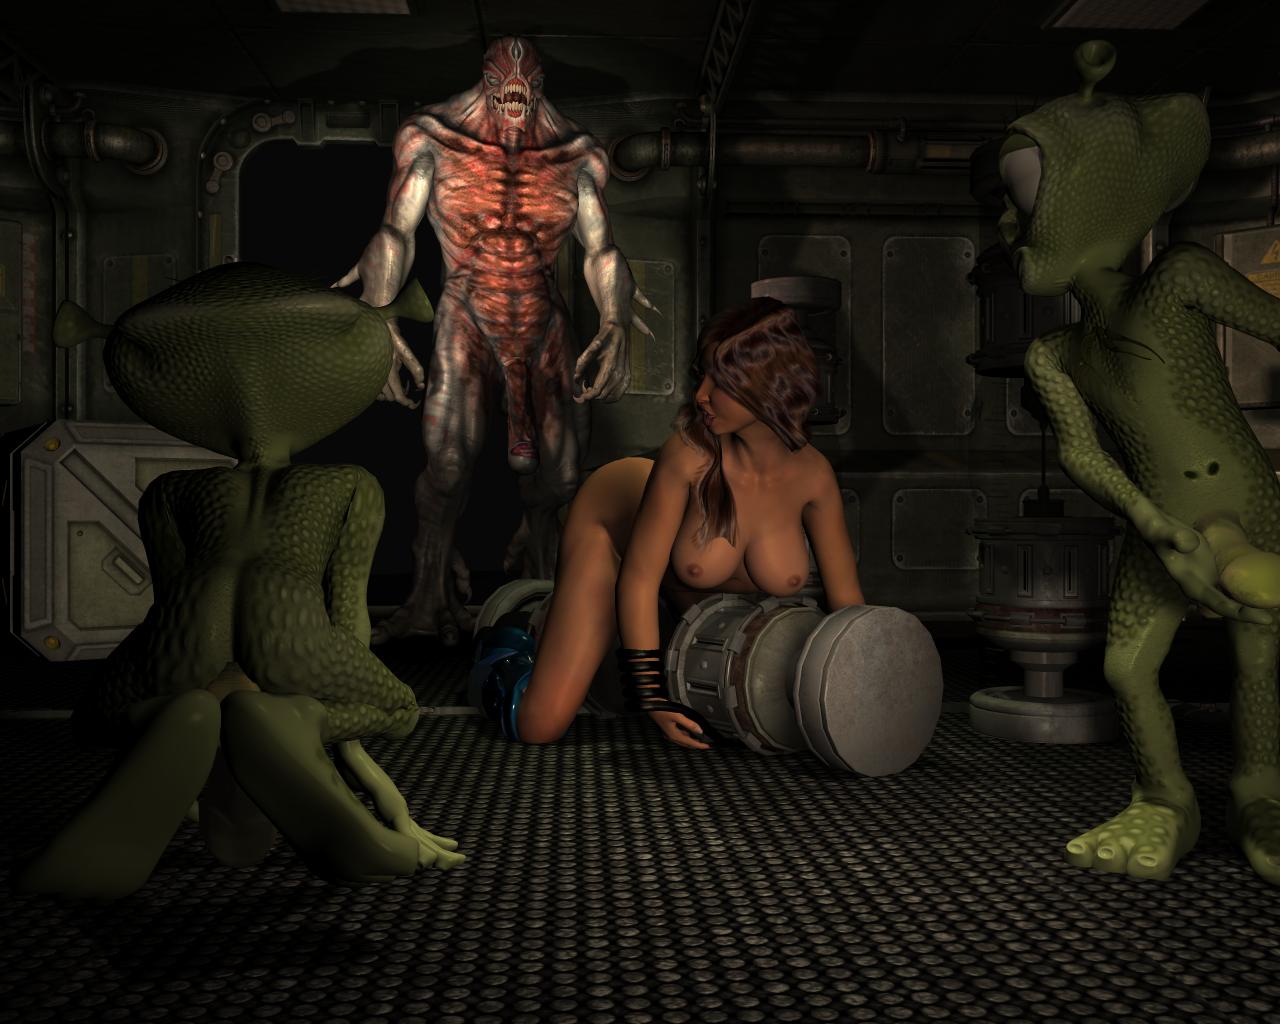 3d Aliens Fucking Girls - Best Sex Images, Free Porn Pics and Hot XXX Photo...